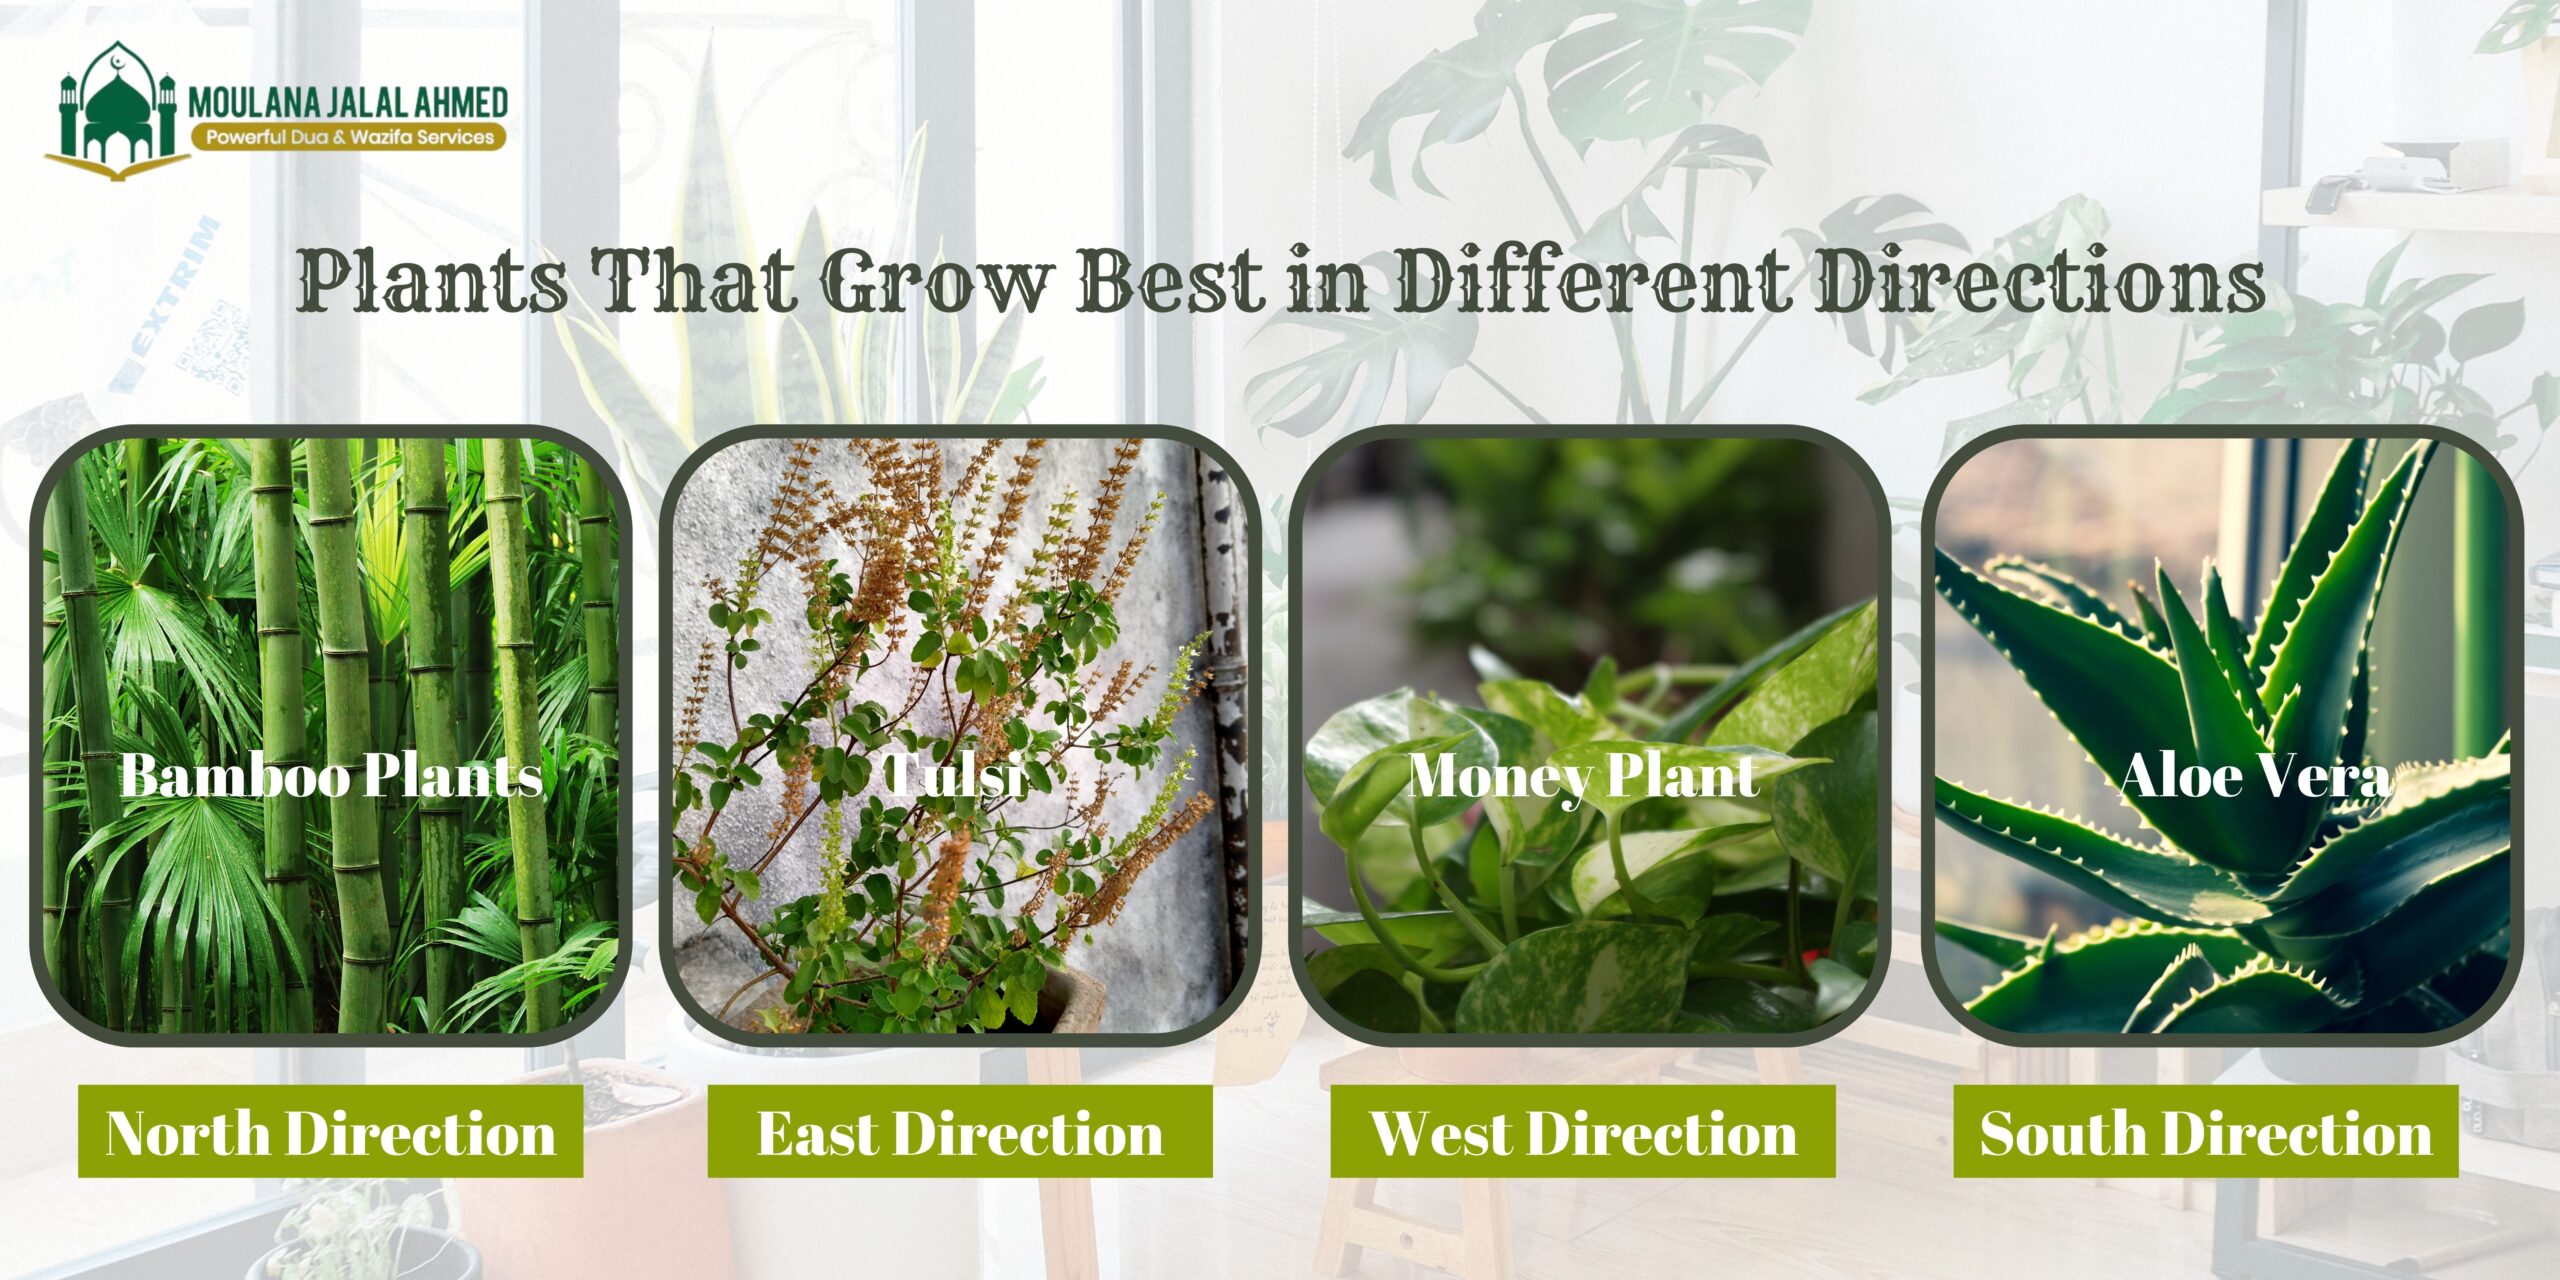 Plants That Grow Best in Different Directions